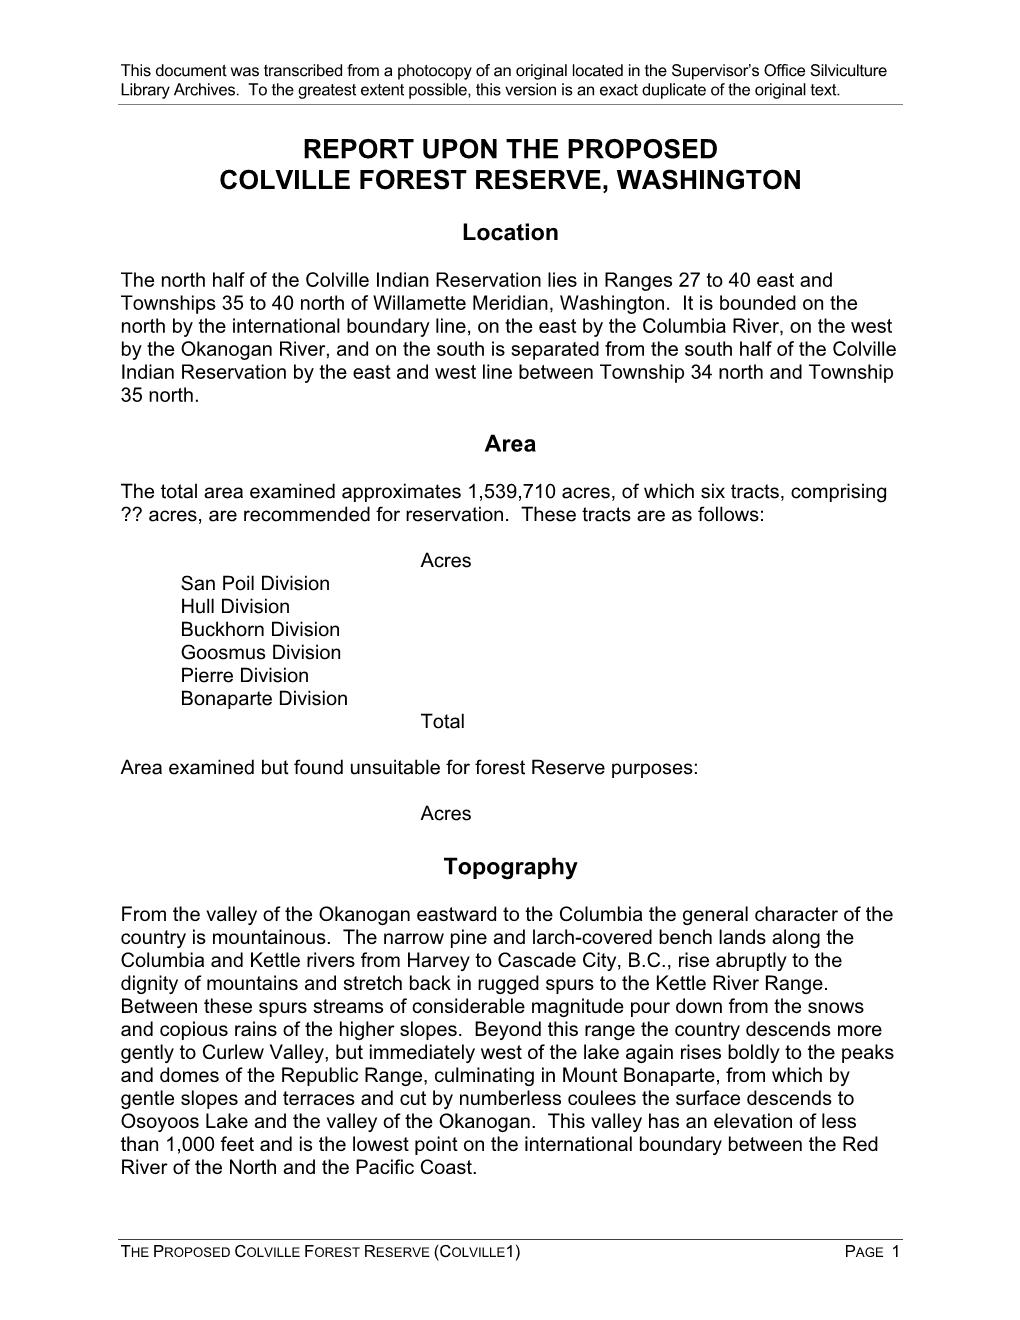 Report Upon the Proposed Colville Forest Reserve, Washington